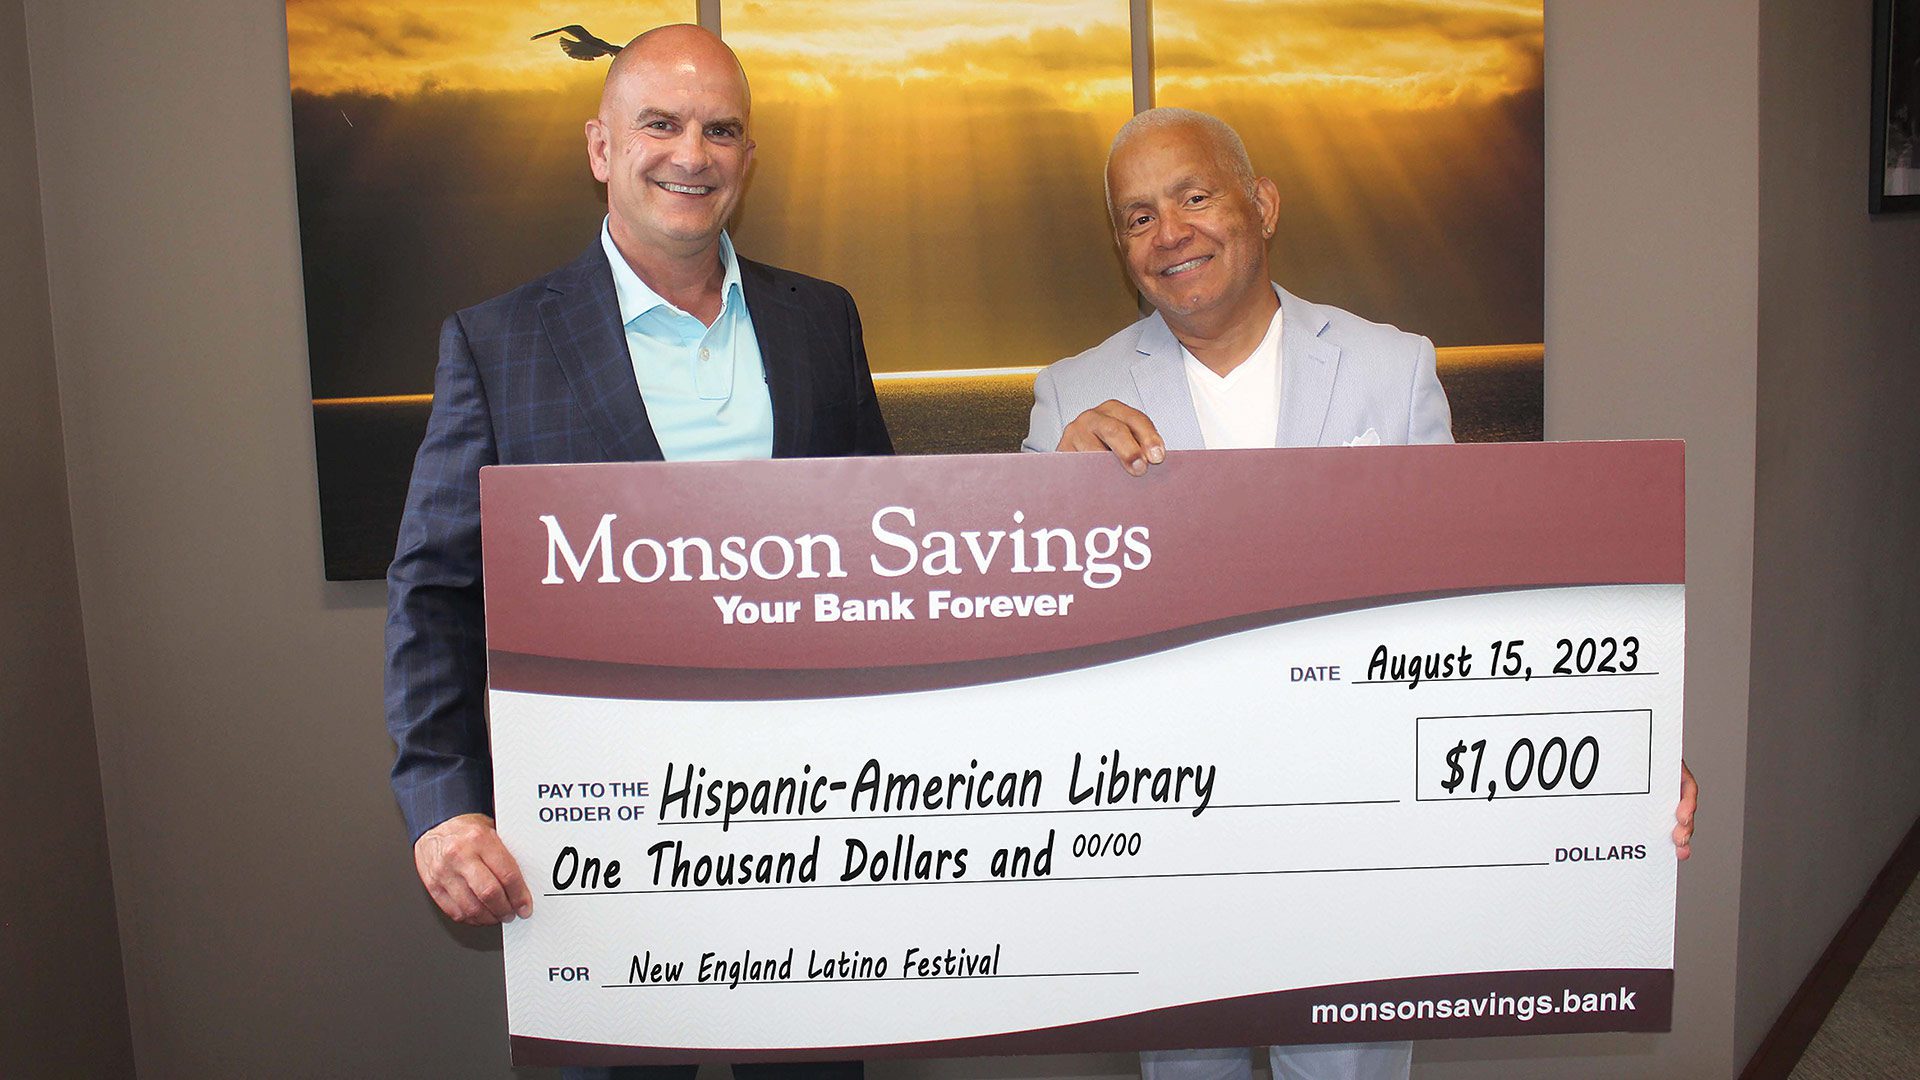 Pictured: Monson Savings Bank President and CEO Dan Moriarty (left) and Hispanic-American Library Executive Director Juan Falcon.